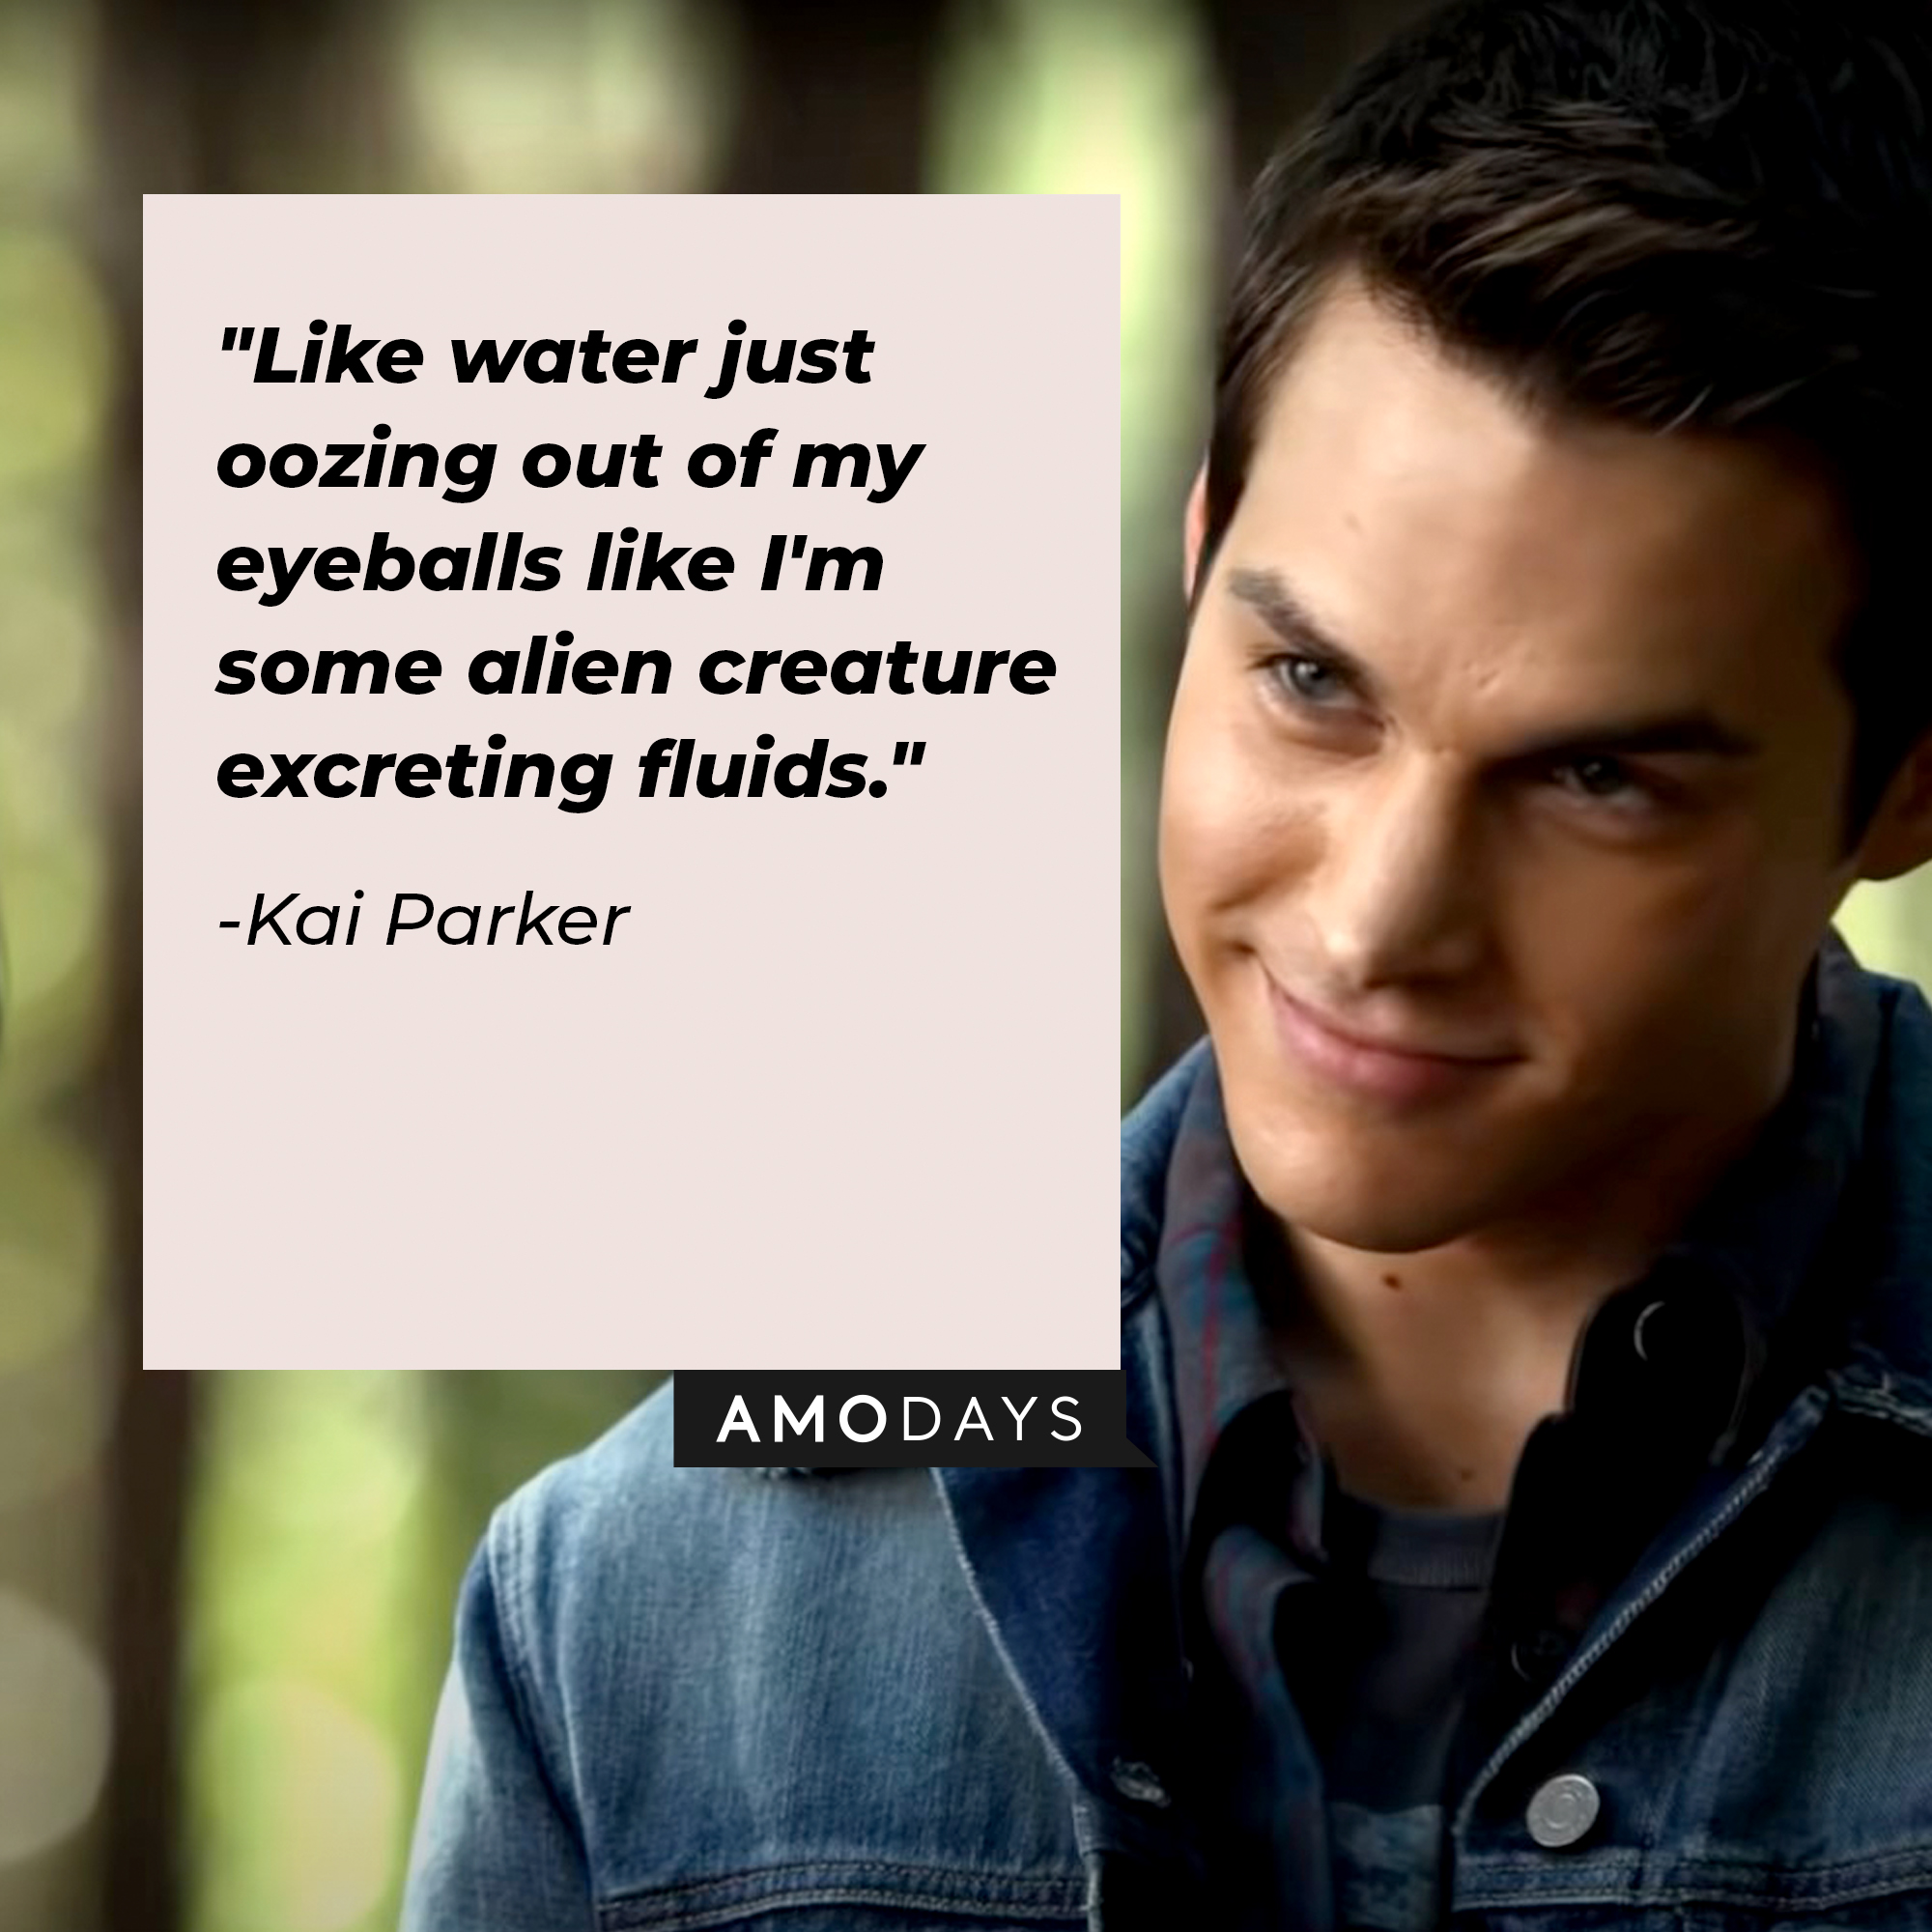 Kai Parker's quote: "Like water just oozing out of my eyeballs like I'm some alien creature excreting fluids." | Source: Facebook.com/thevampirediaries